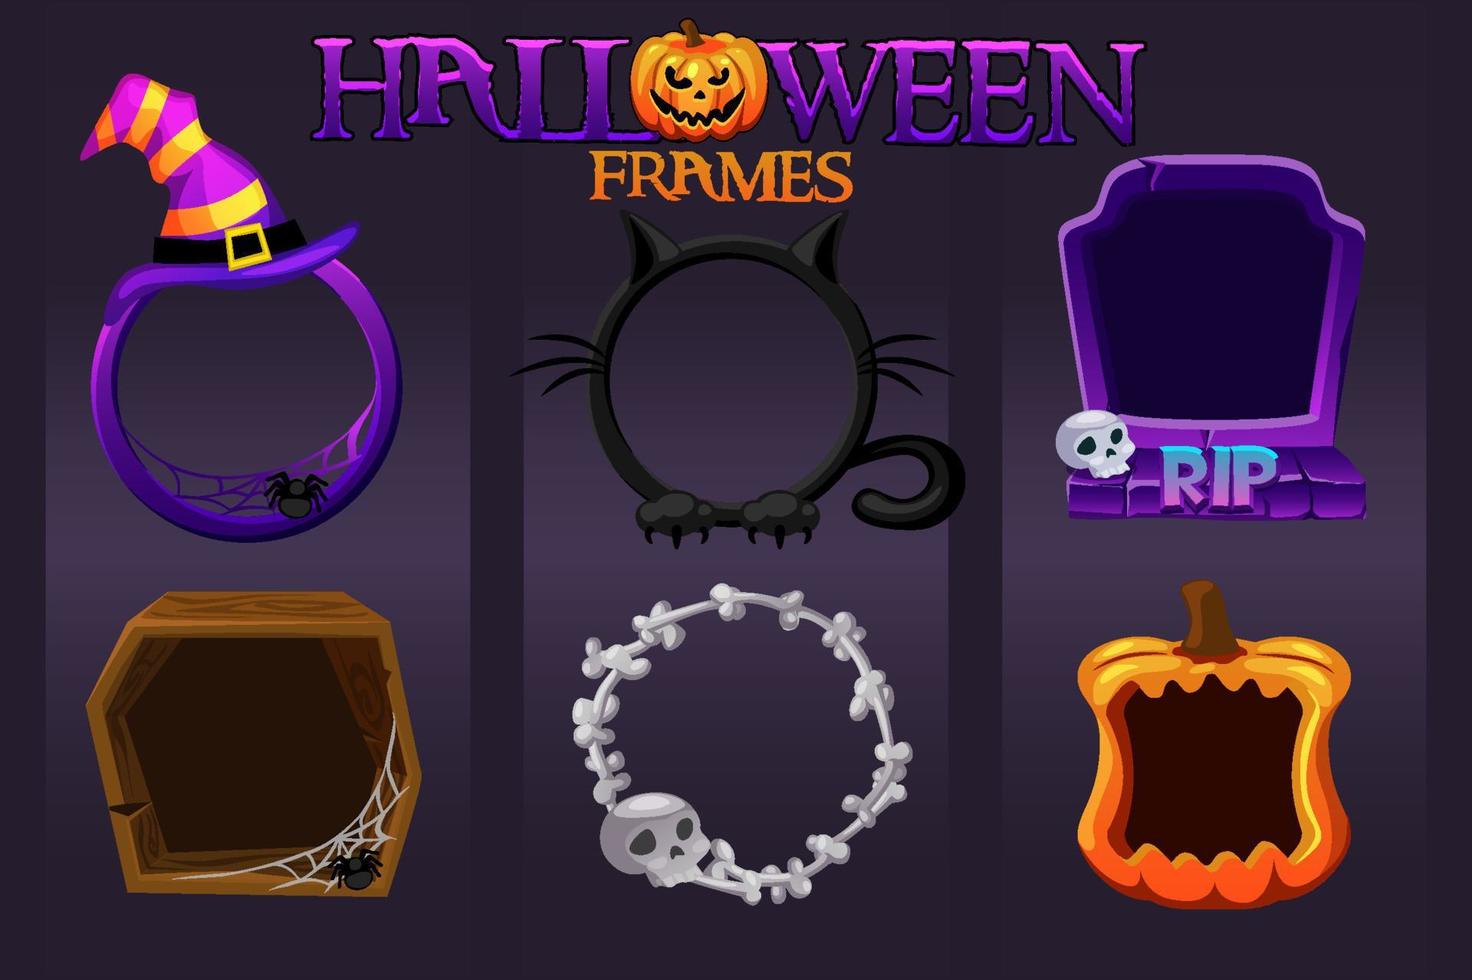 Halloween empty avatar frames, scary templates for graphic design. Vector illustration collection frames cat, bones, pumpkin for the holiday.